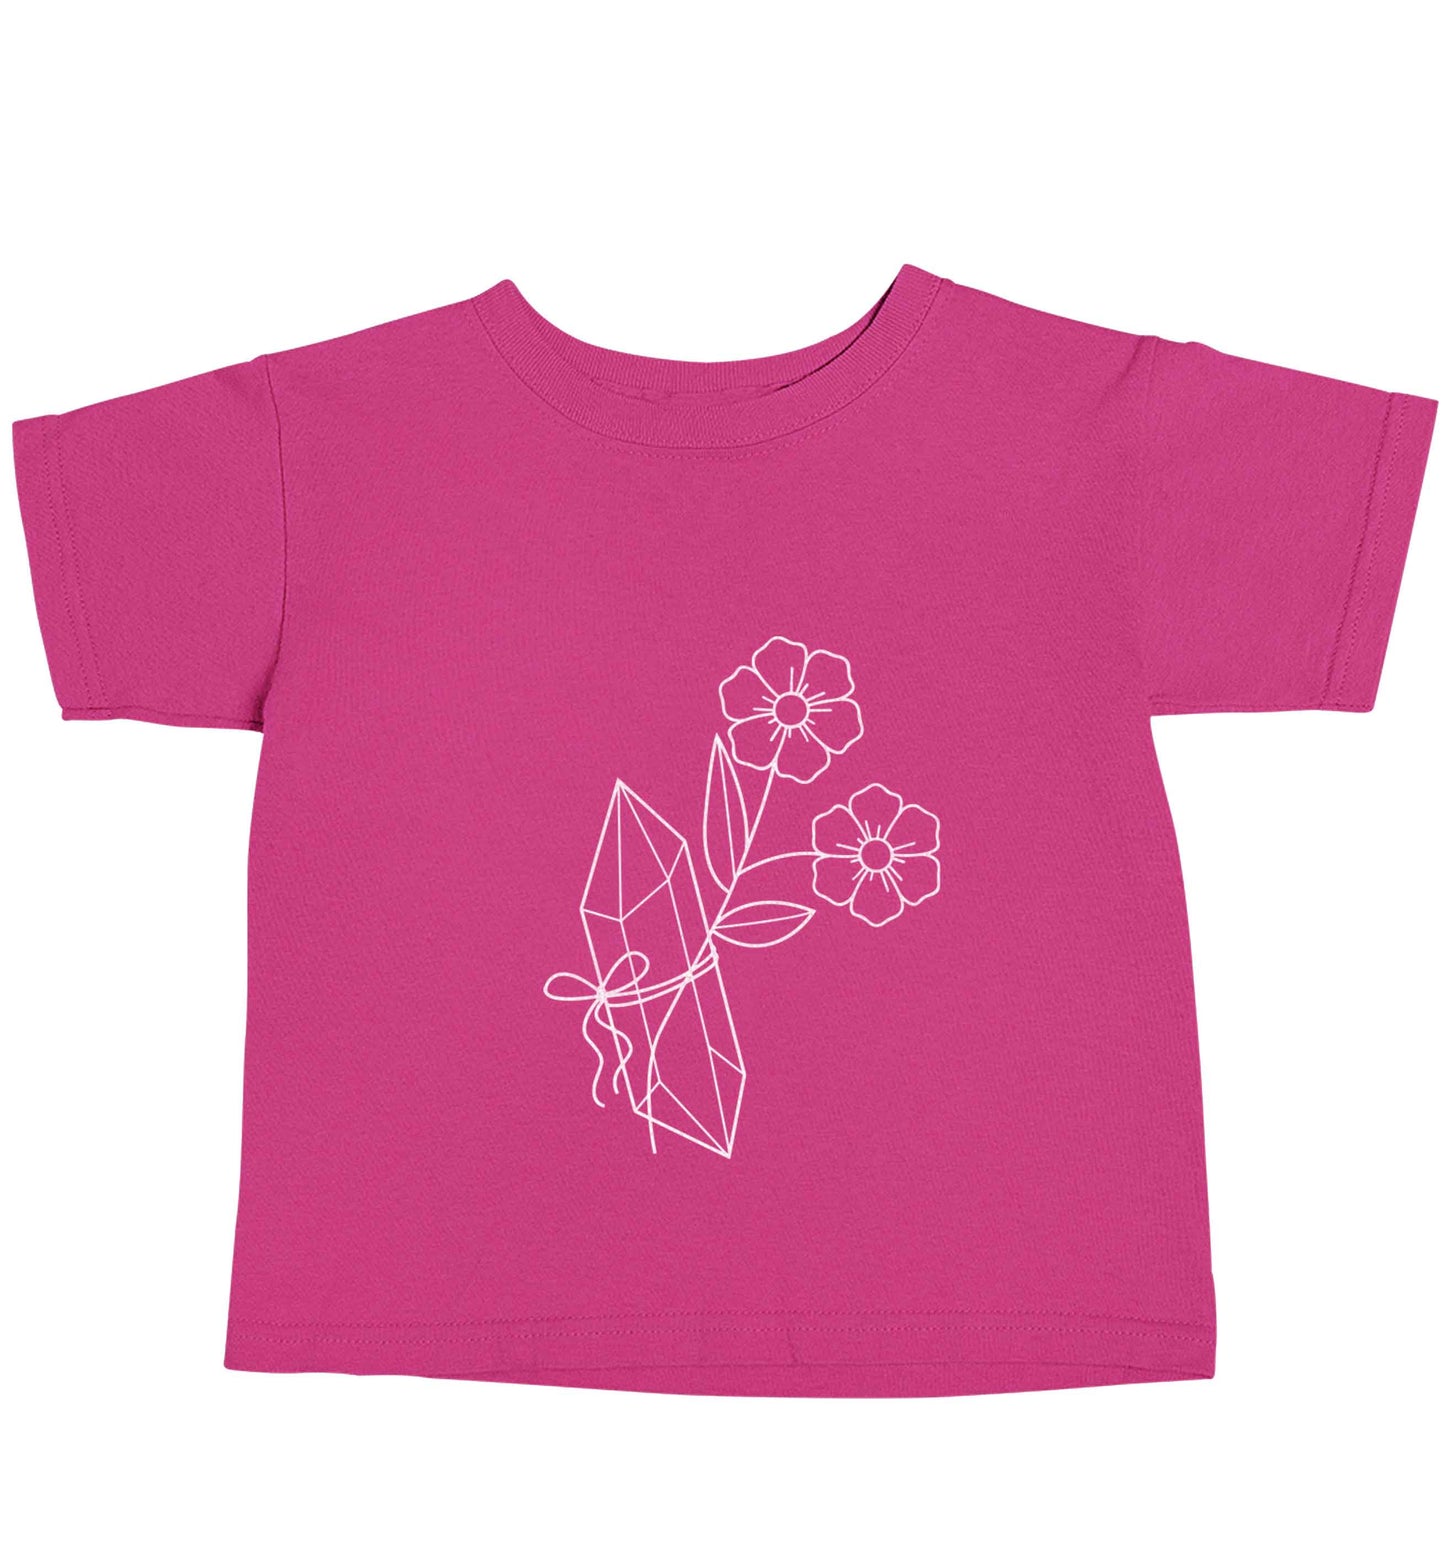 Crystal flower illustration pink baby toddler Tshirt 2 Years